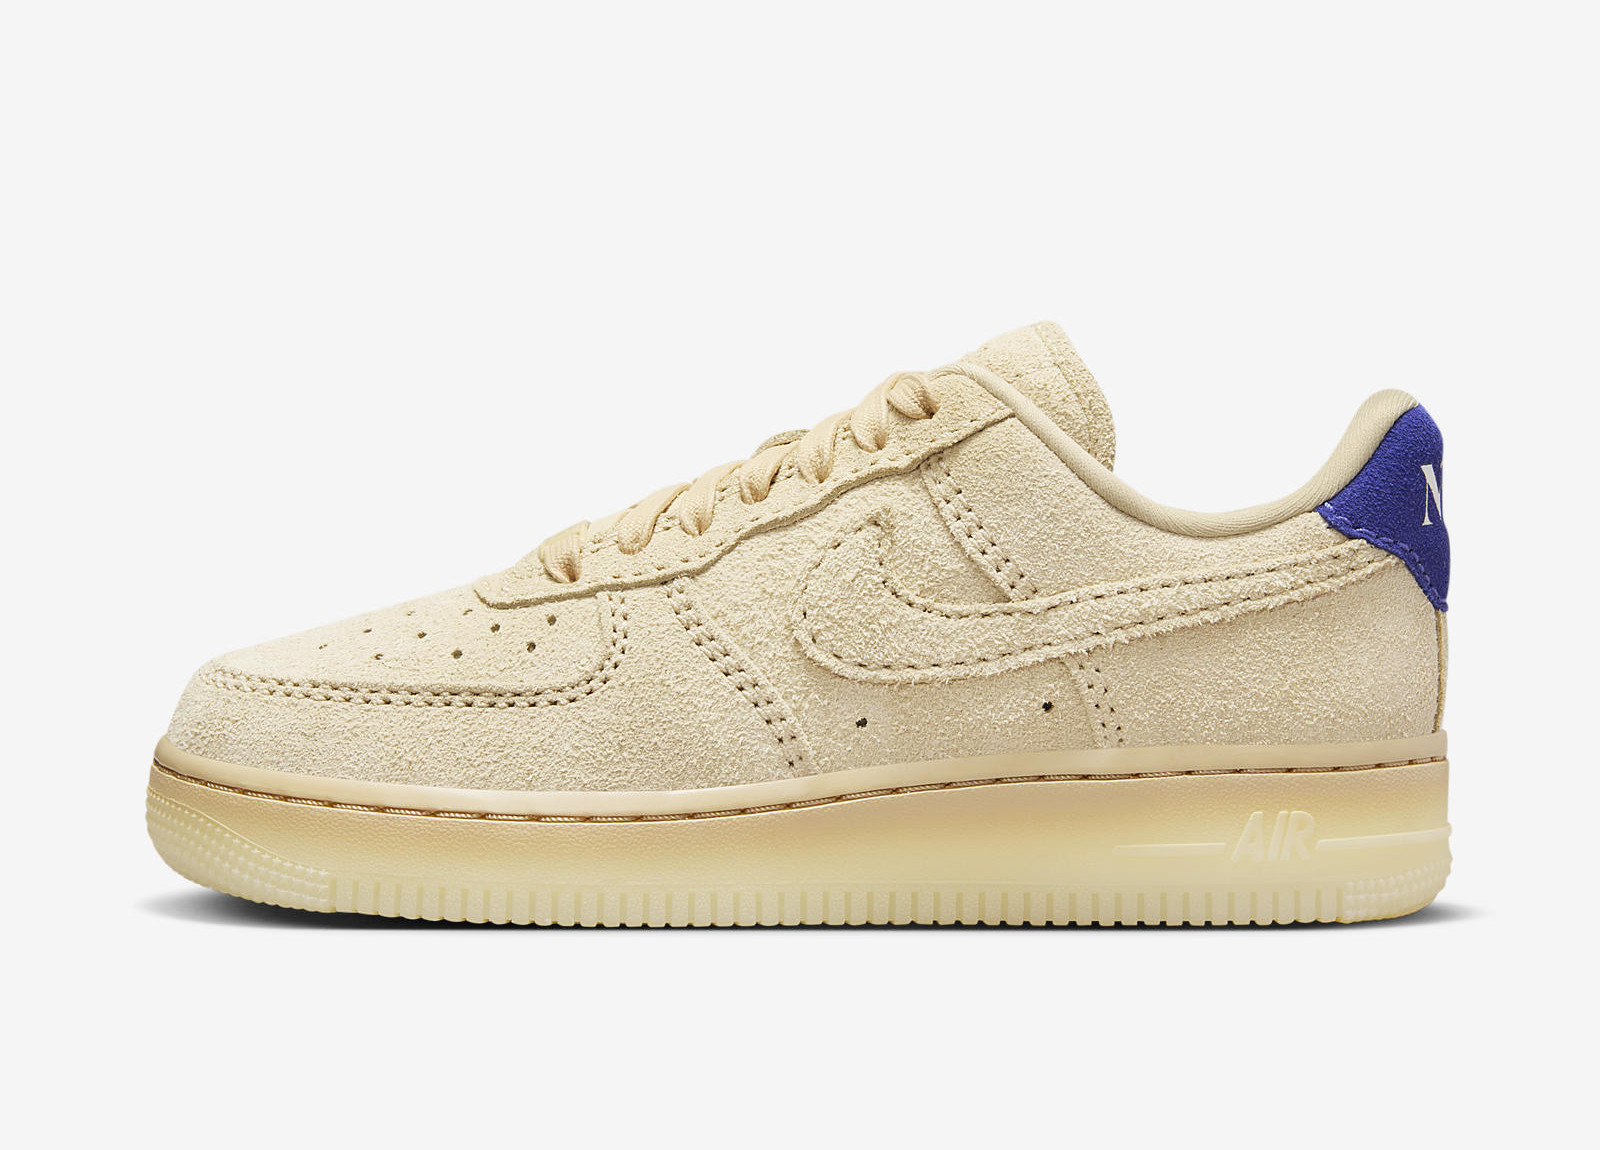 Nike Air Force 1 07 Low
« Elemental Gold »